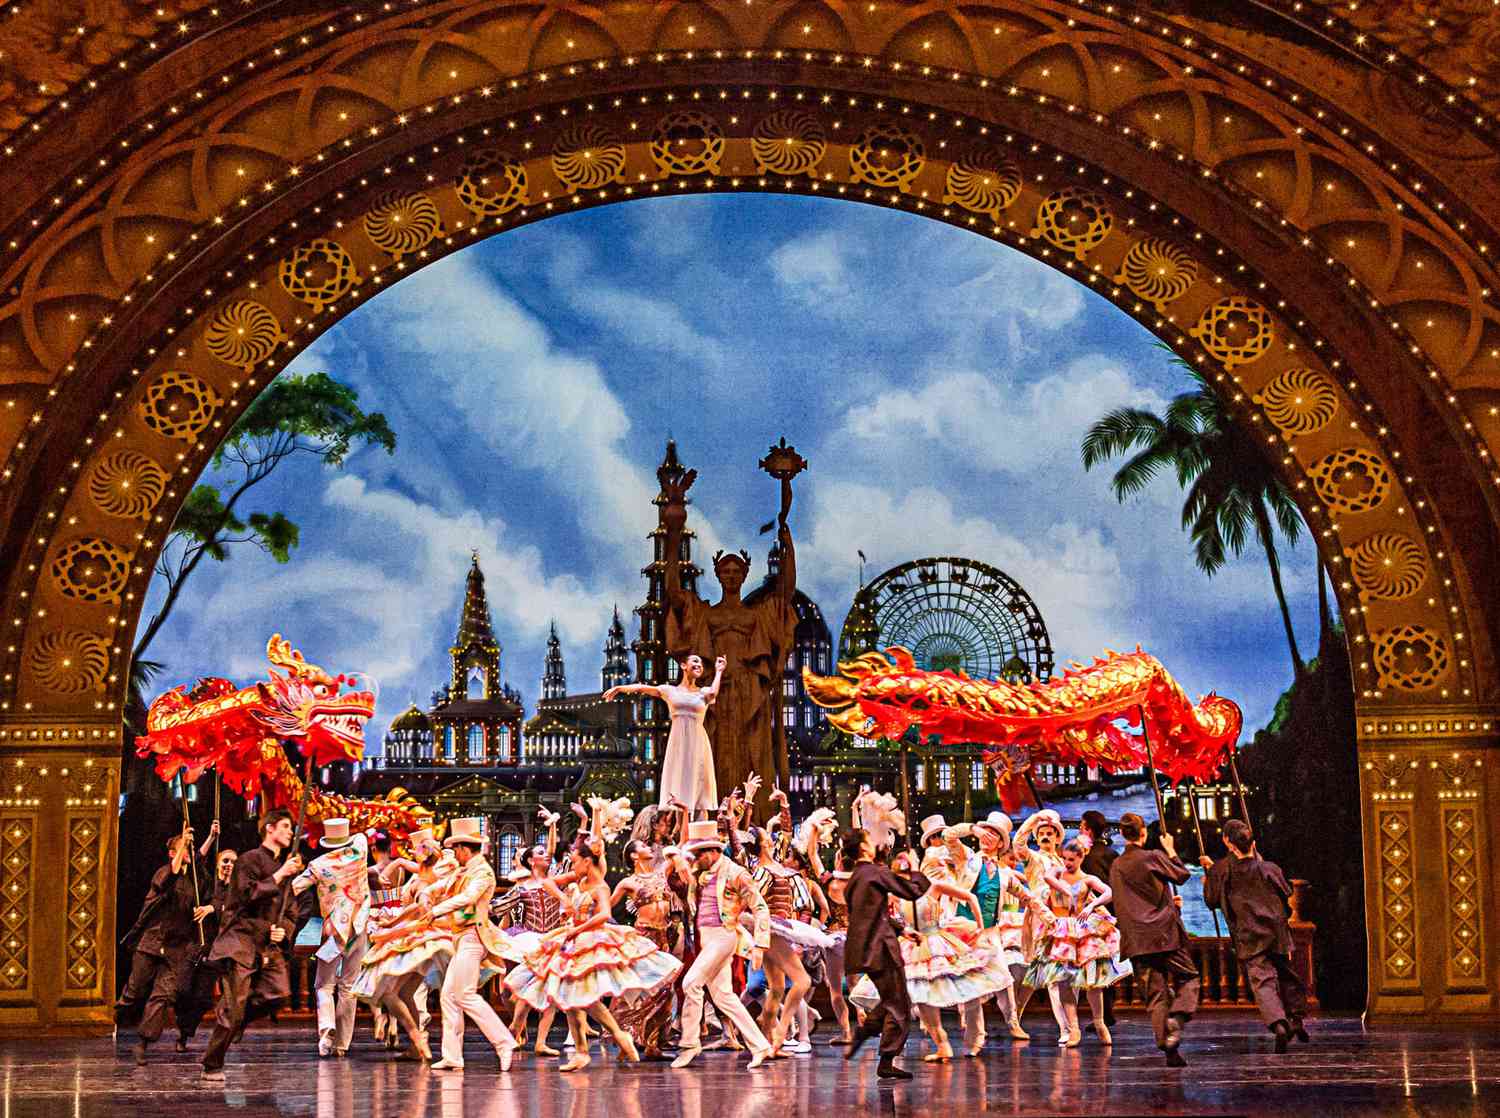 Chinese dancers and fairgoers swirl through Marie's dream against a reimagined World's Fair backdrop in the new The Nutcracker, with music by the Chicago Philharmonic.